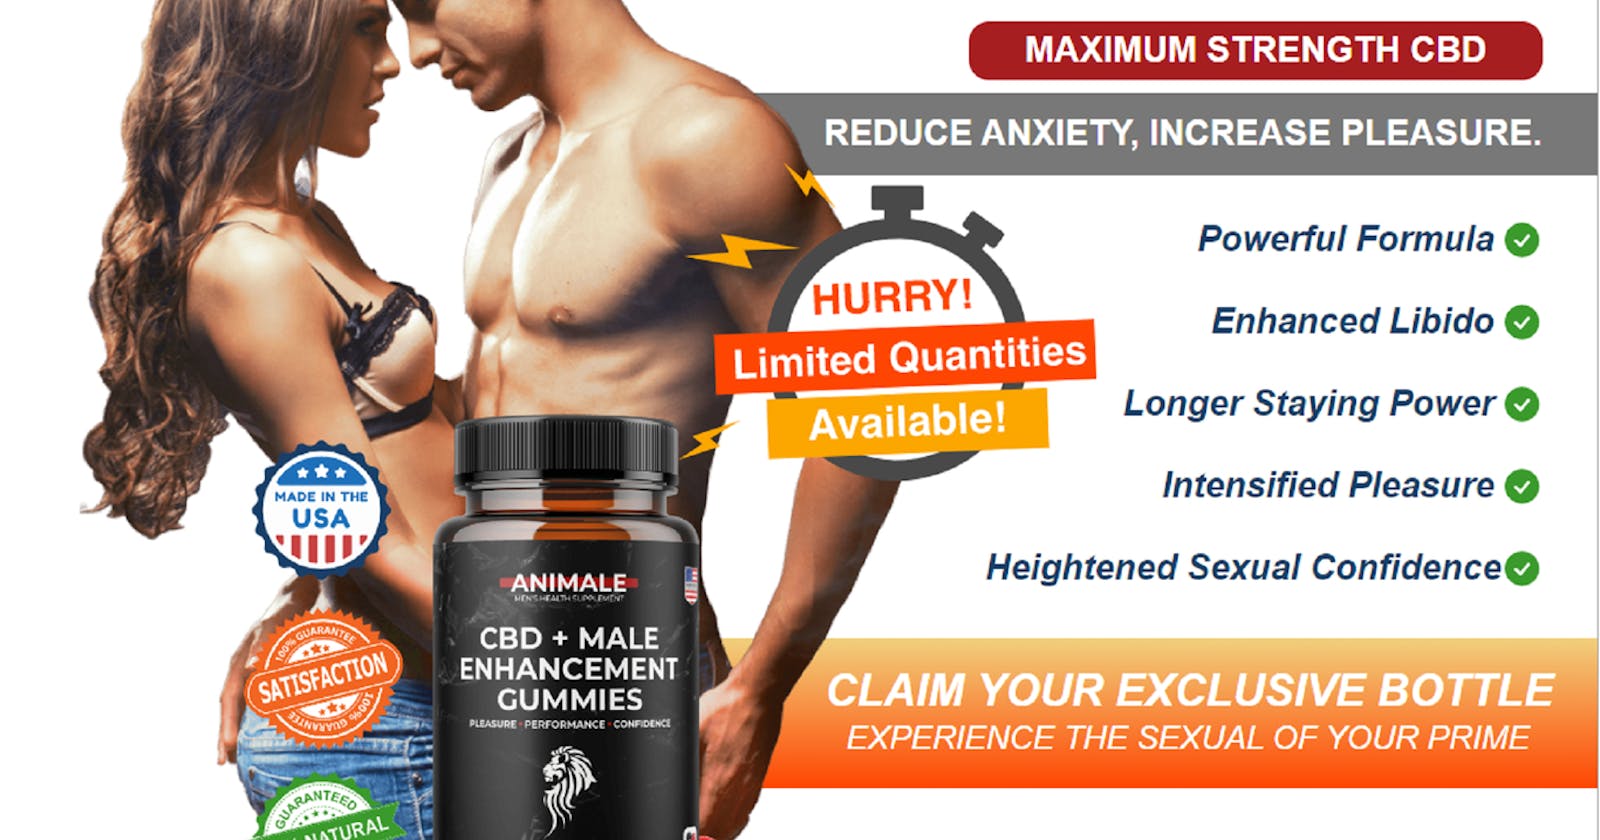 Gladiator Male Enhancement {SHOCKING NEWS} What are Real OR Fake? Read More